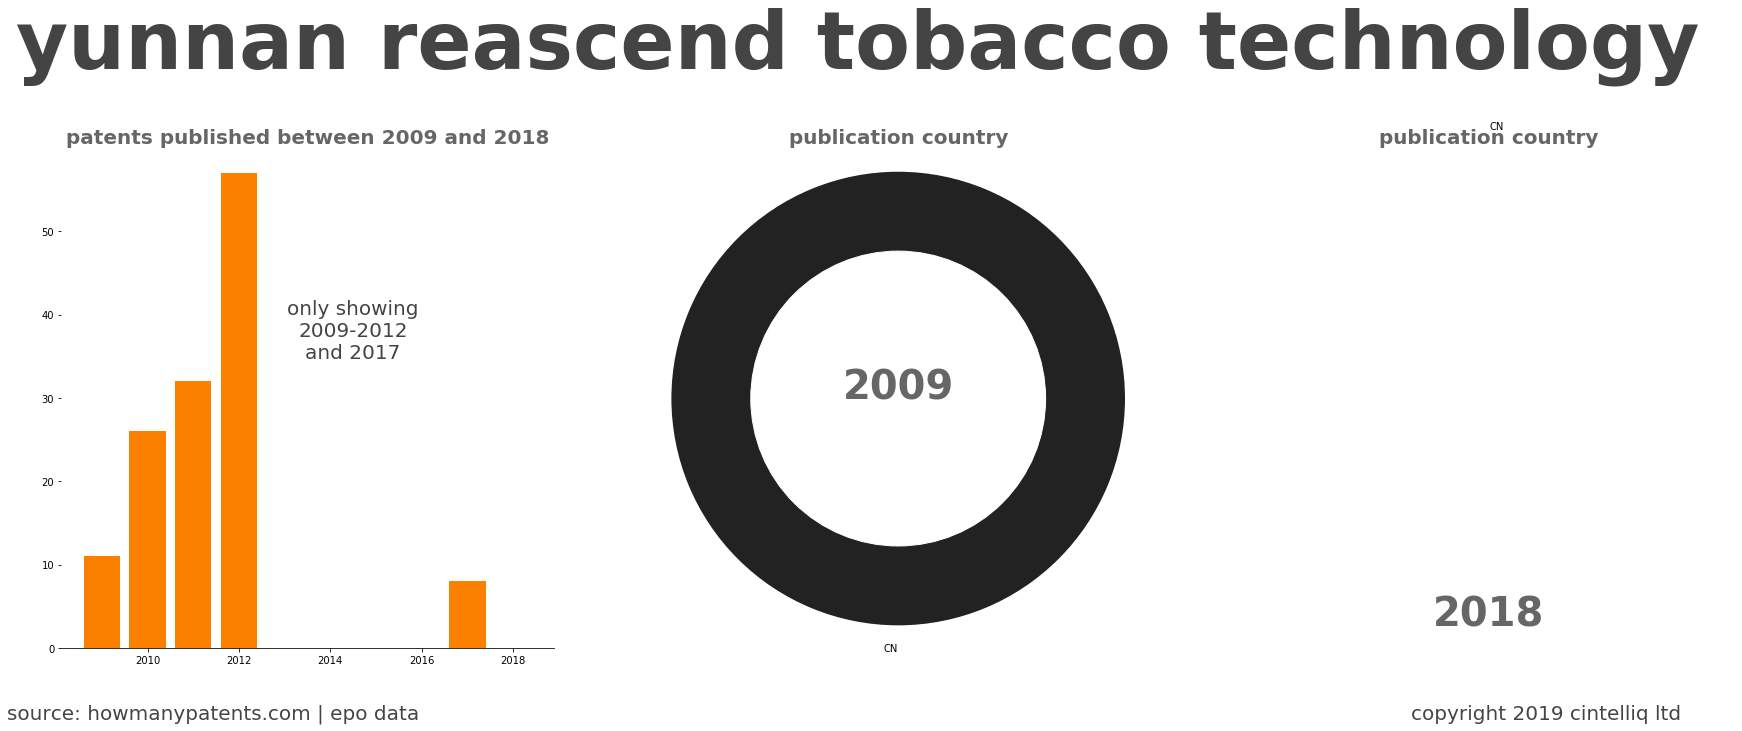 summary of patents for Yunnan Reascend Tobacco Technology 